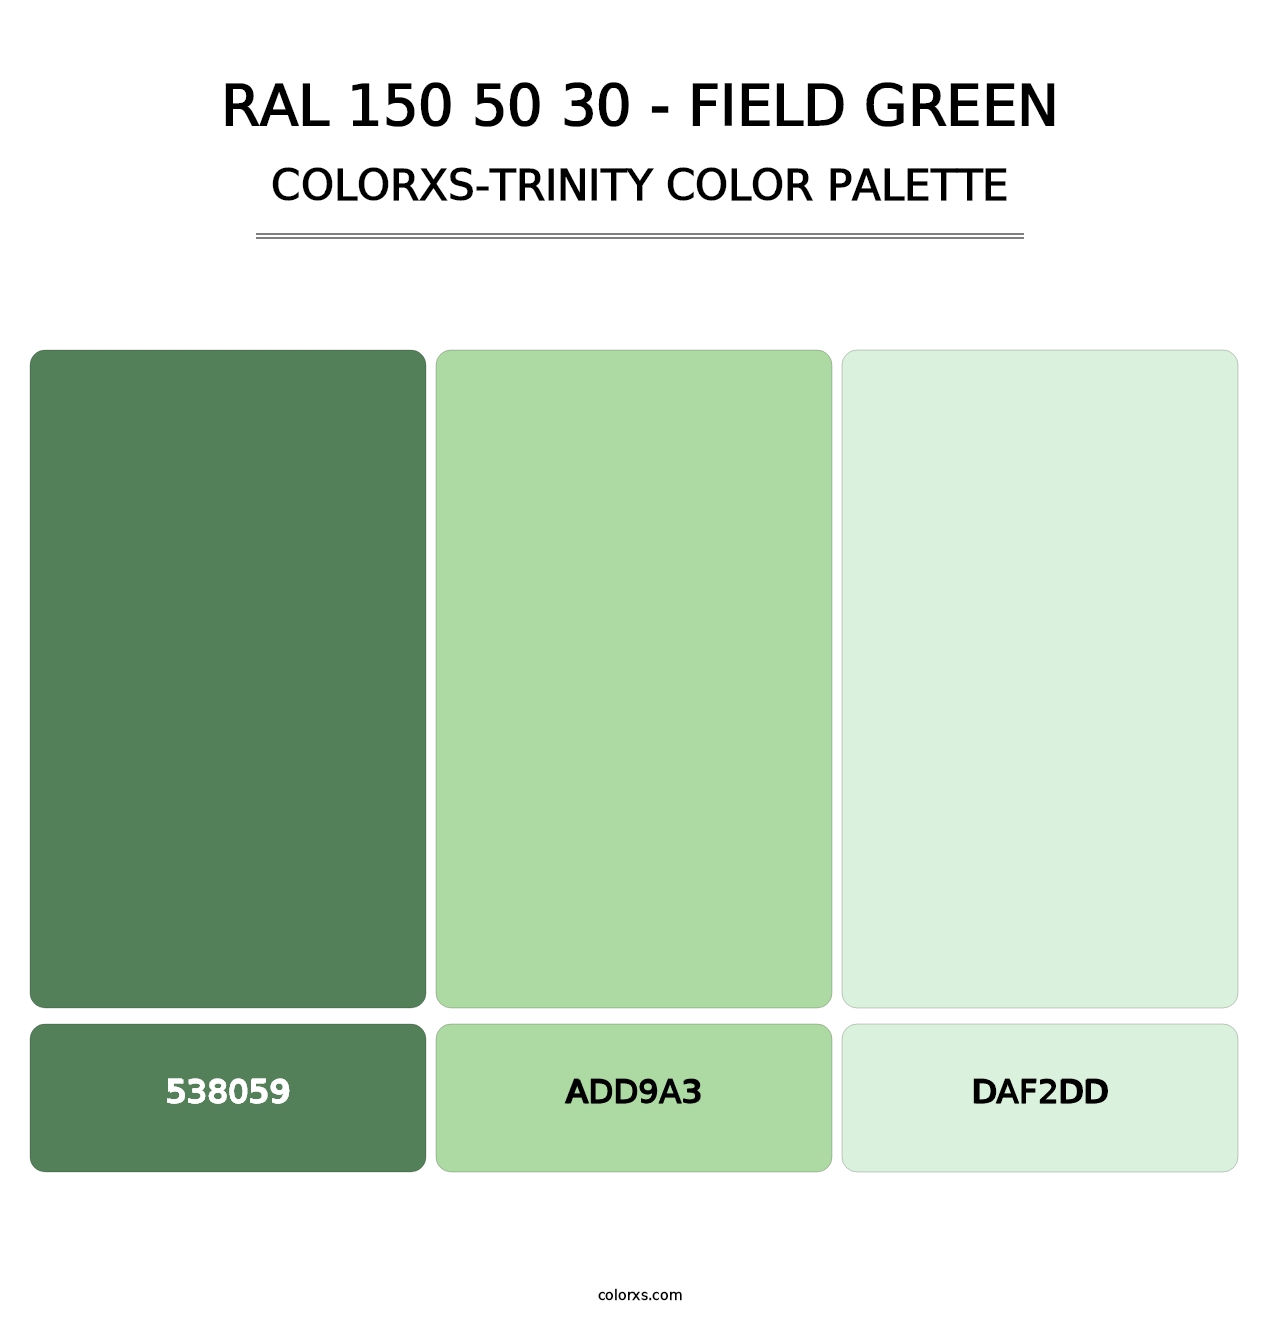 RAL 150 50 30 - Field Green - Colorxs Trinity Palette